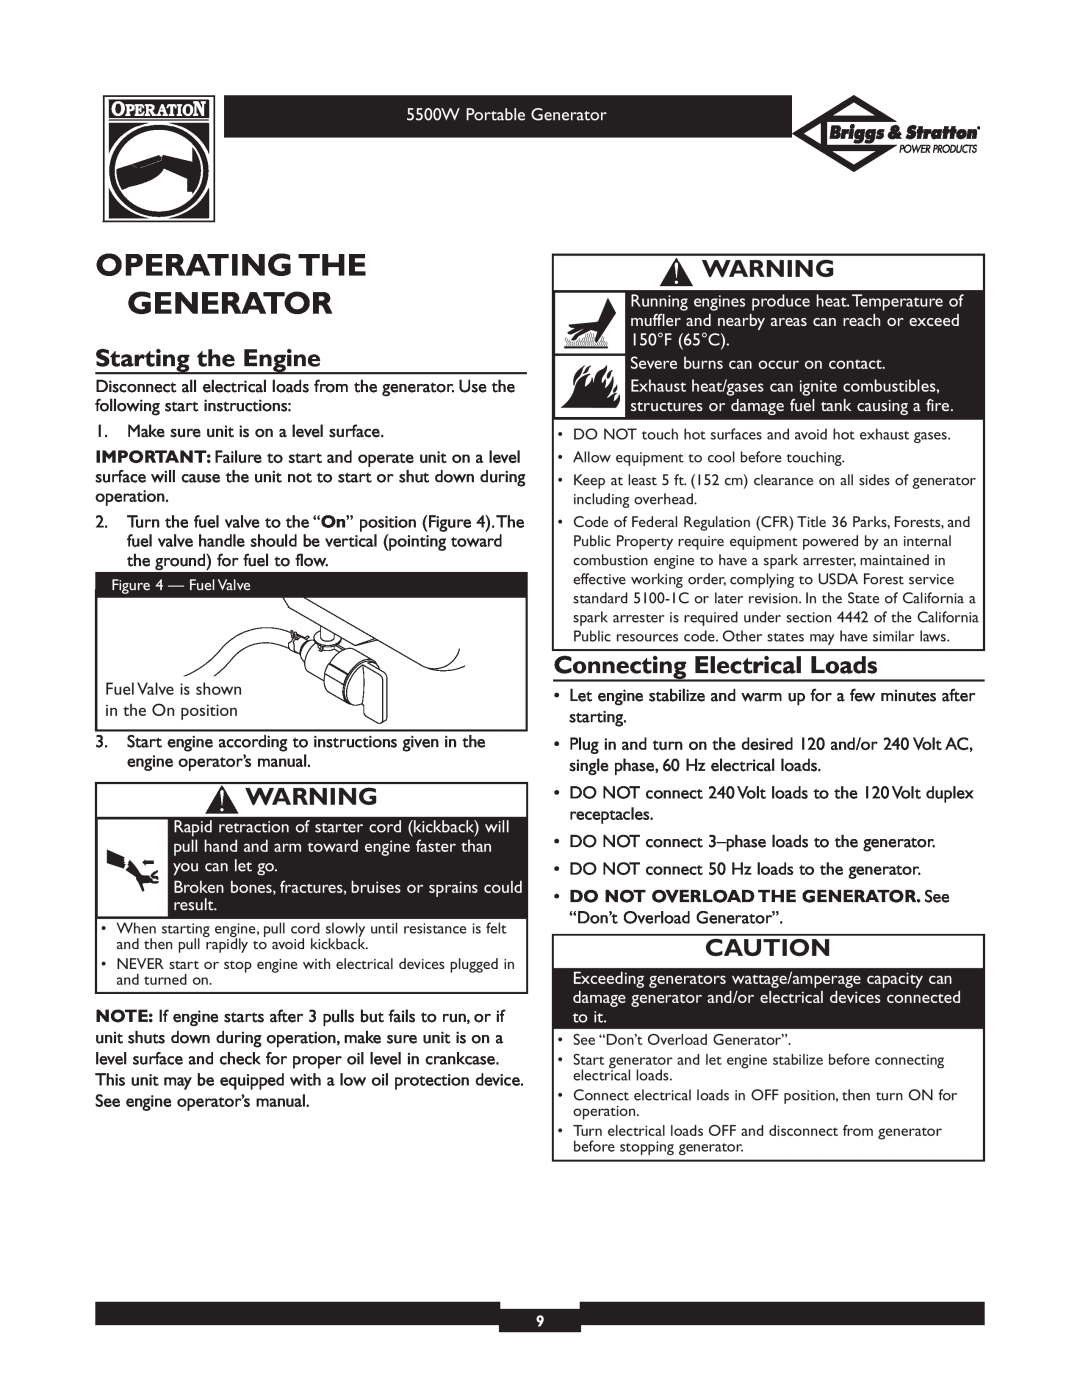 Briggs & Stratton 030209-1 operating instructions Operating The Generator, Starting the Engine, Connecting Electrical Loads 